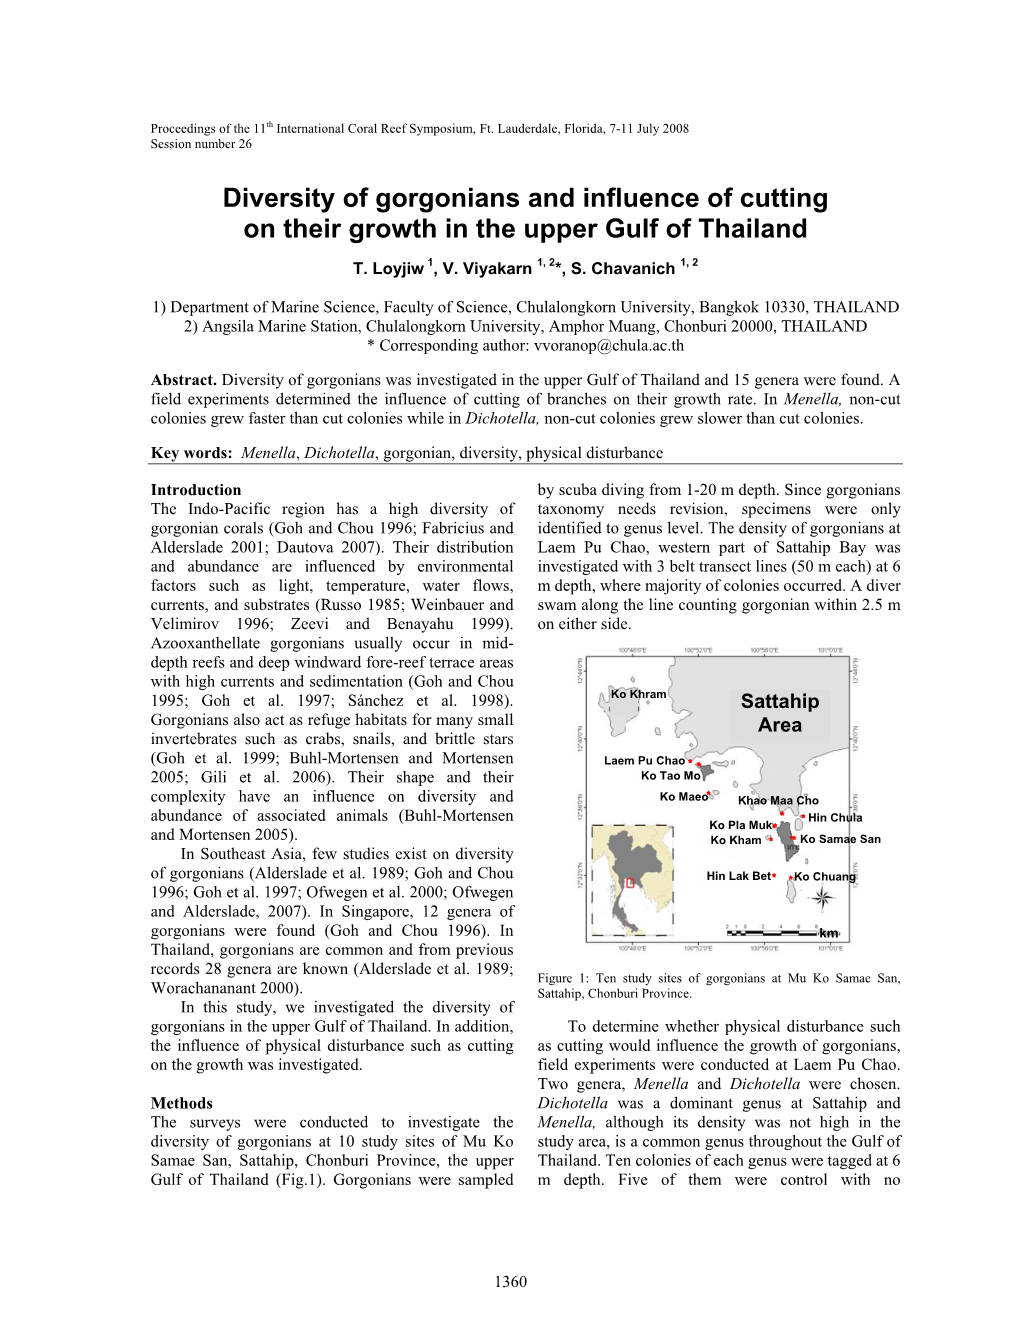 Diversity of Gorgonians and Influence of Cutting on Their Growth in the Upper Gulf of Thailand